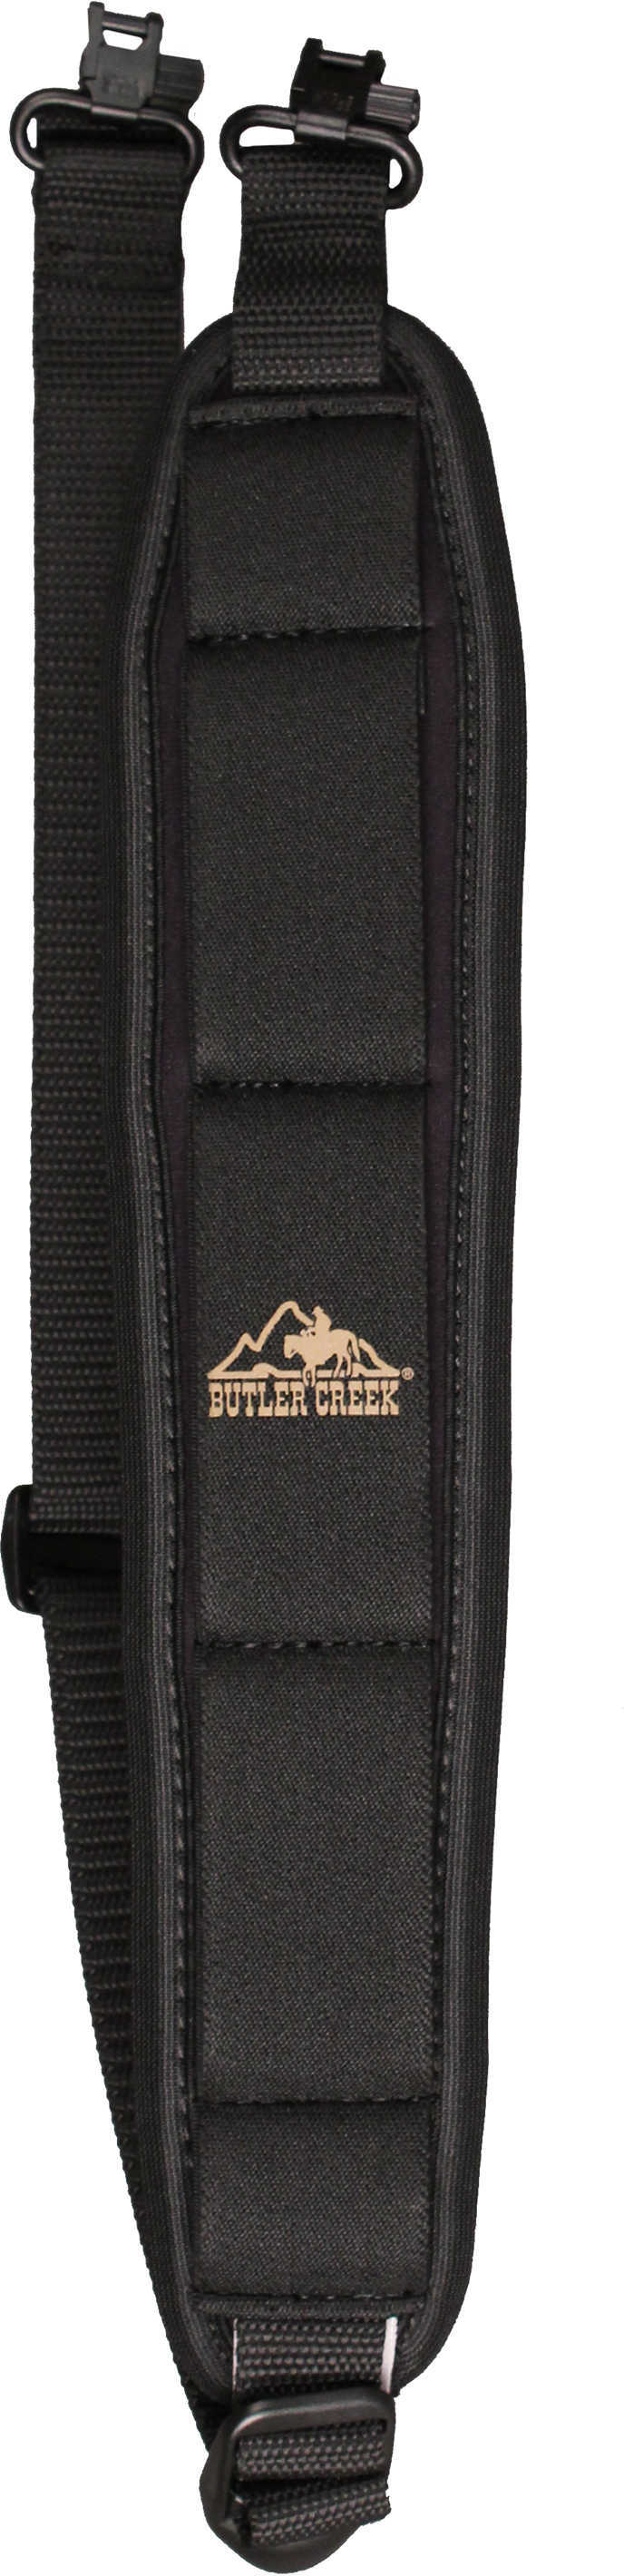 Comfort Stretch Rifle Sling With Swivels - Black Uncle Mikes QD Sewn-In Designed To Be Shock Absorber For You